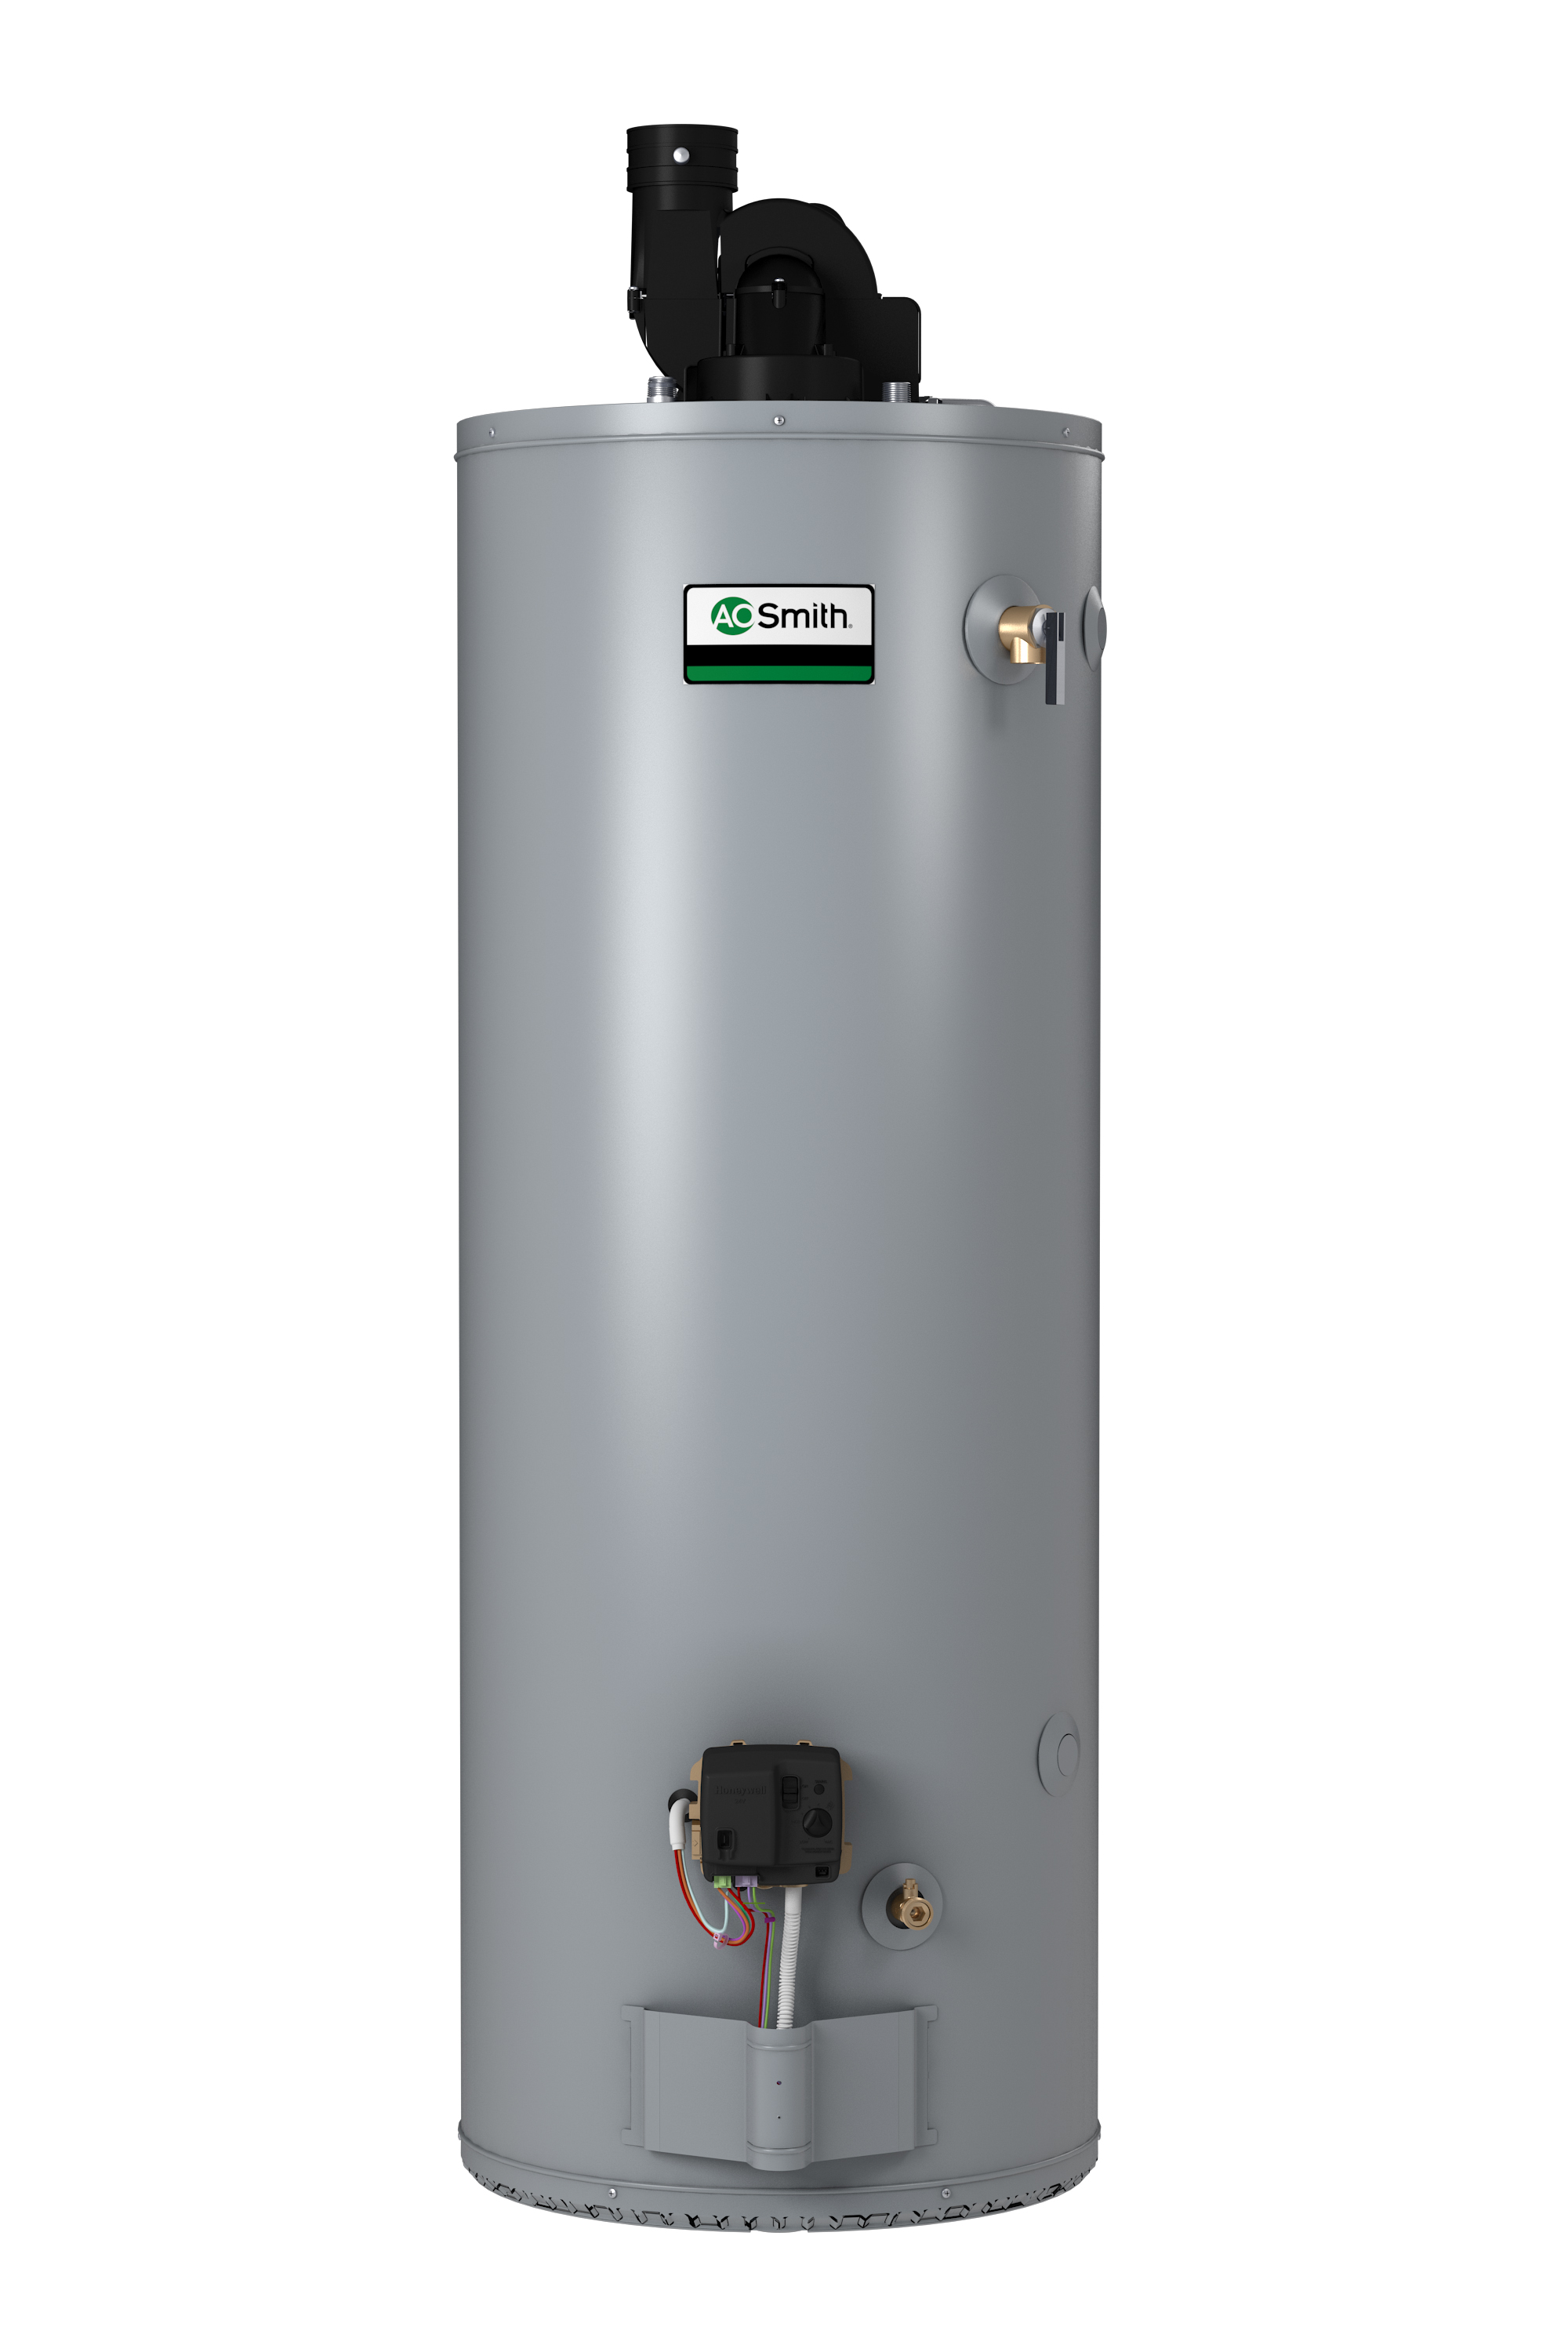 AO SMITH BPD-80: 75 GALLON, 76,000 BTU, 3inch OR 4inch VENT, CONSERVATIONIST POWER DIRECT VENT, SINGLE FLUE, NATURAL GAS COMMERICAL WATER HEATER